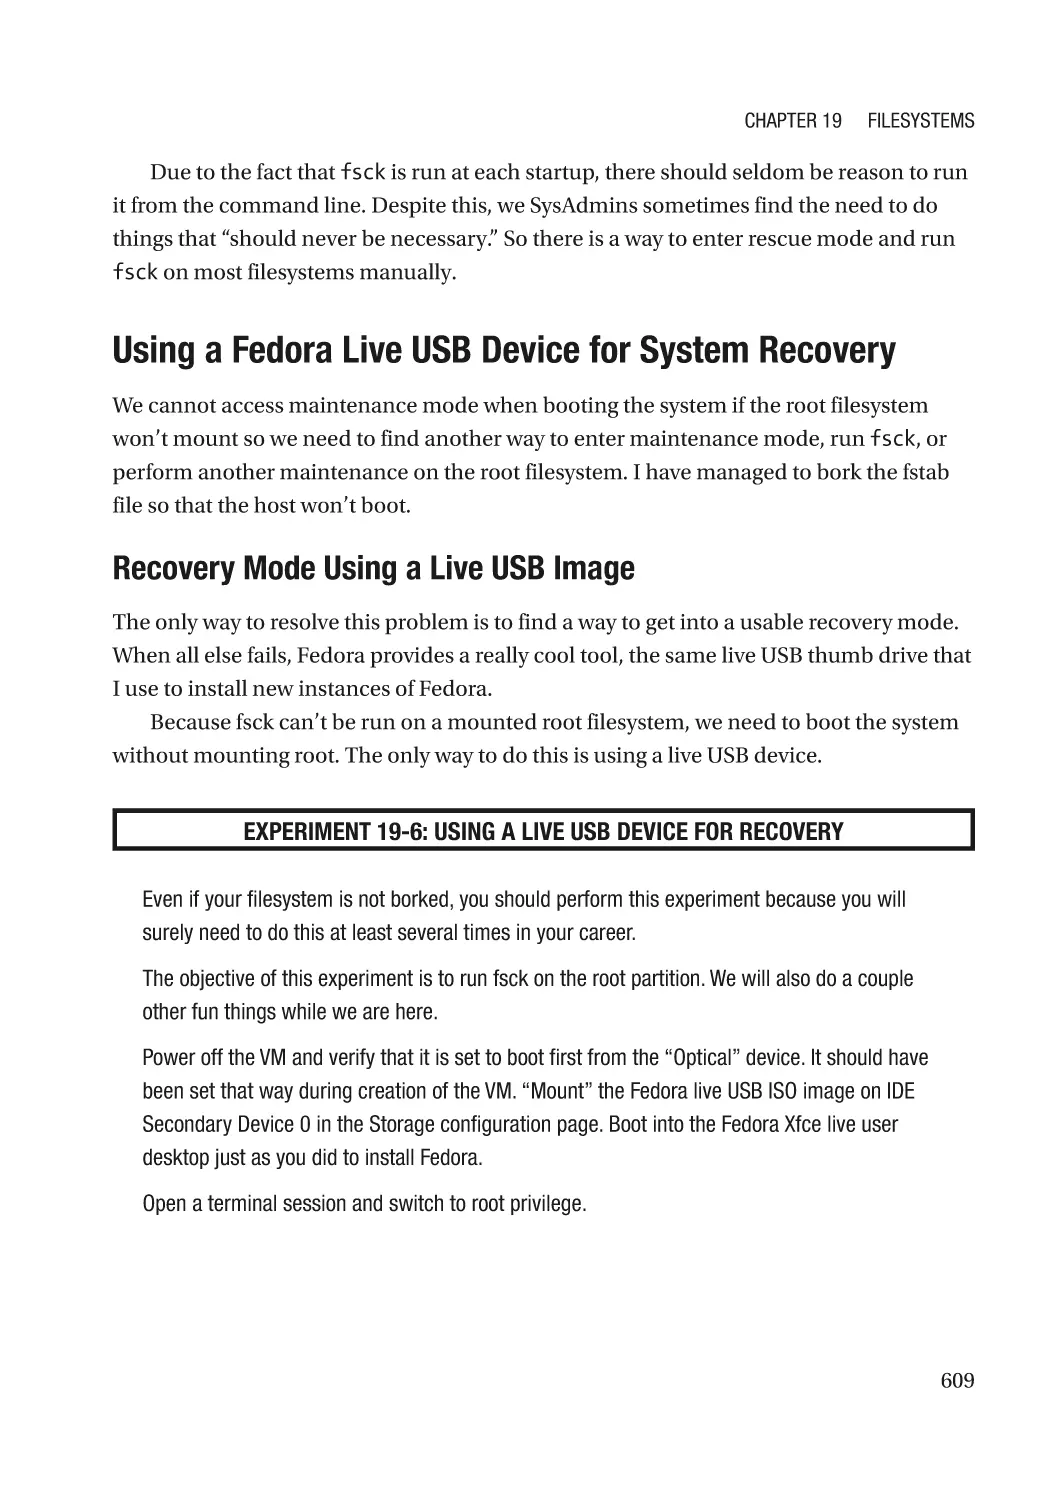 Using a Fedora Live USB Device for System Recovery
Recovery Mode Using a Live USB Image